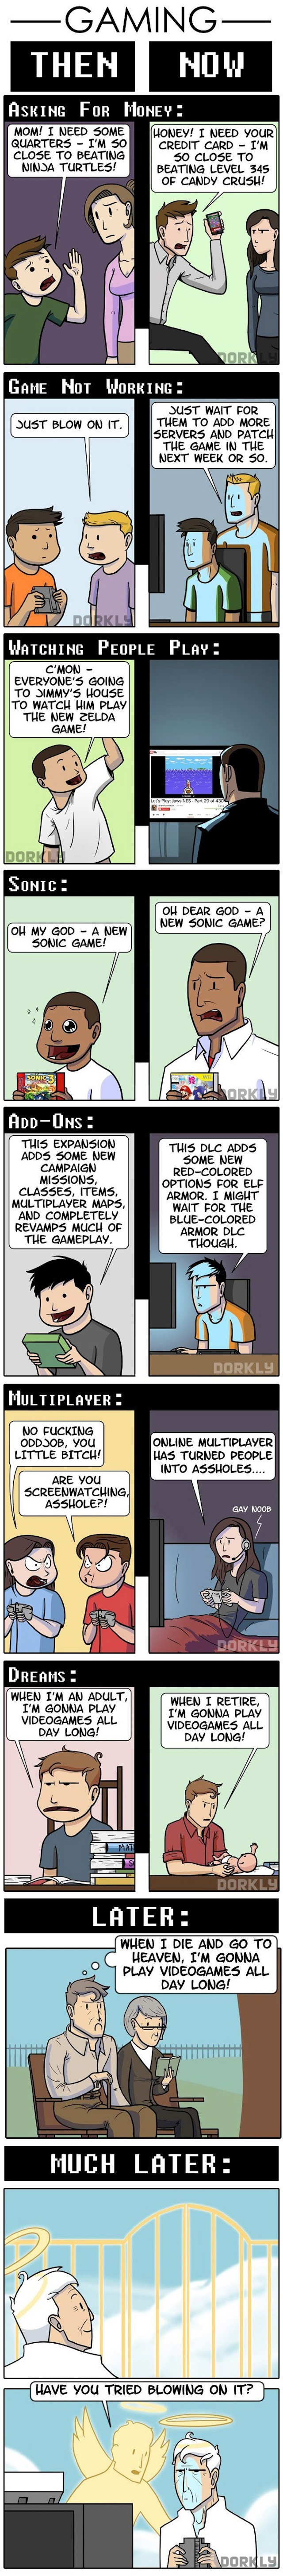 gaming_then_now